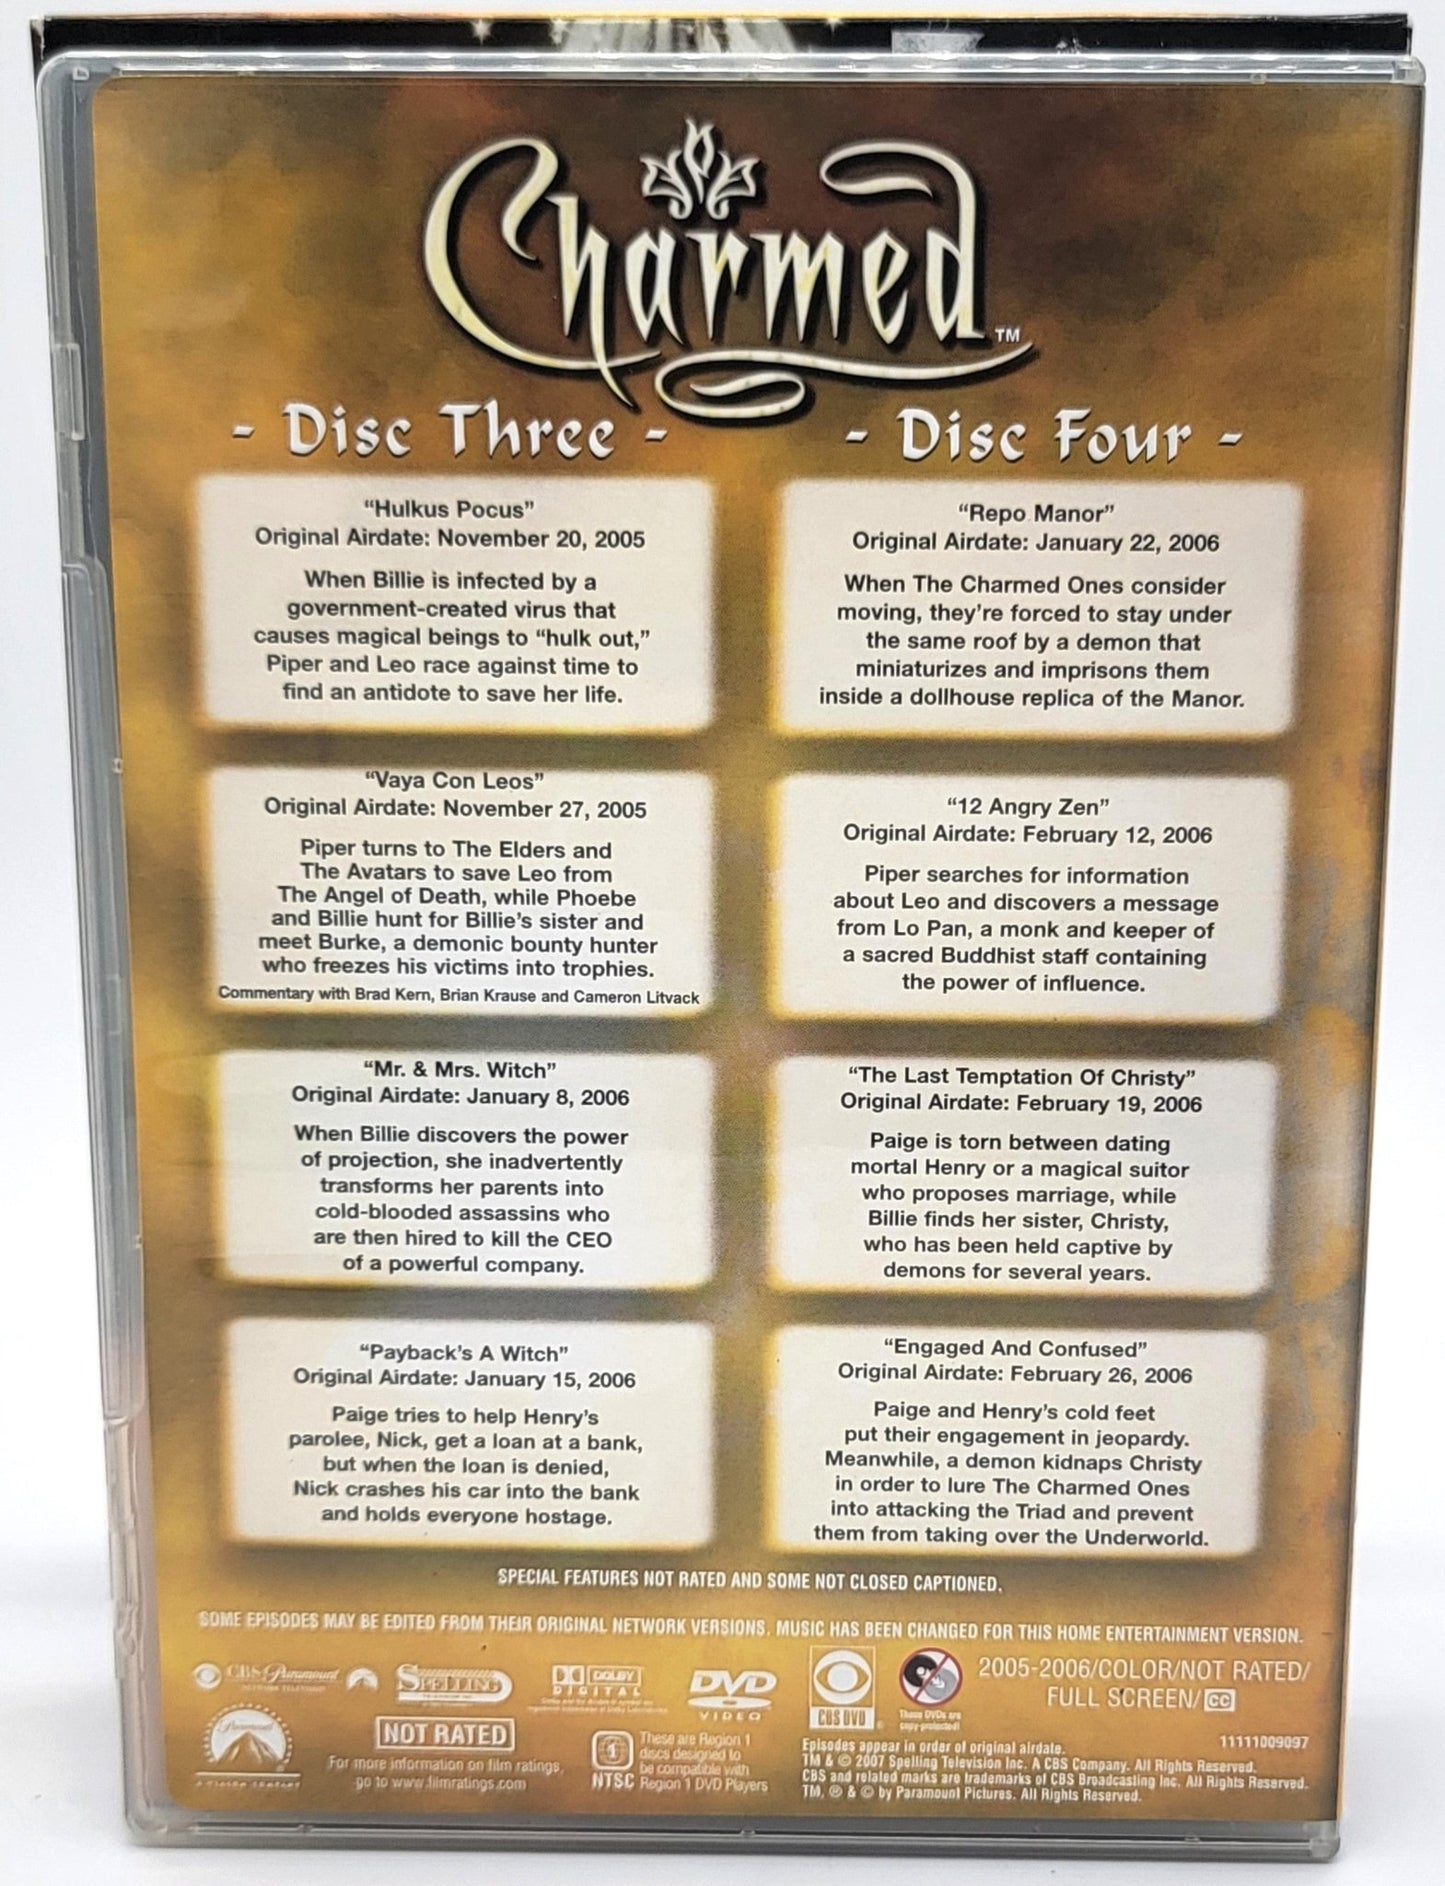 20th Century Fox Home Entertainment - Charmed | DVD | The Complete Eighth and Final Season - DVD - Steady Bunny Shop